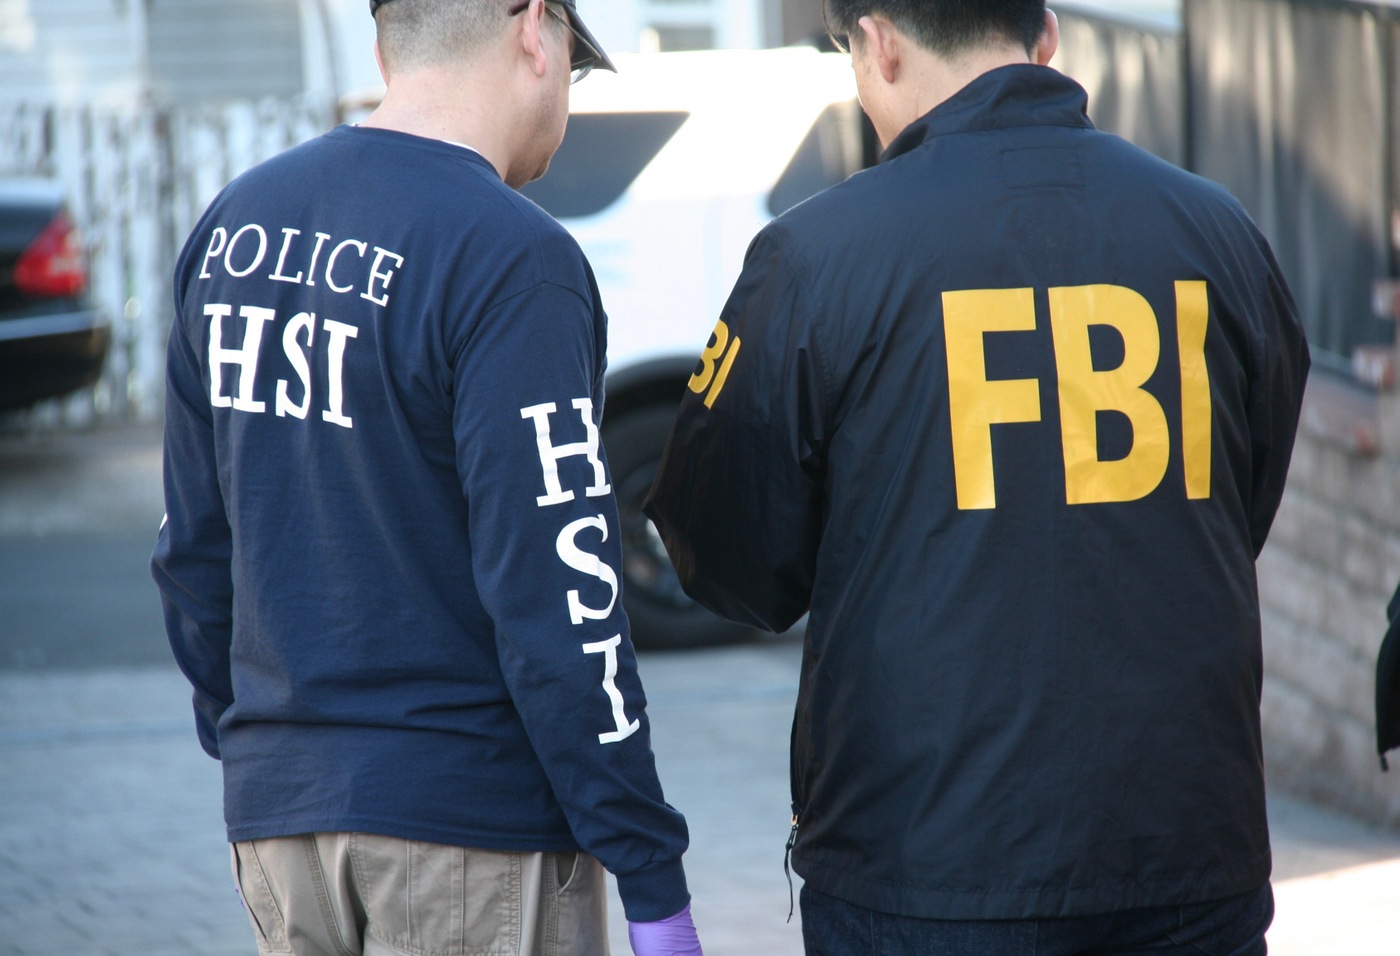 JCODE Task Force members confer during search warrant execution in L.A. in March 2020.